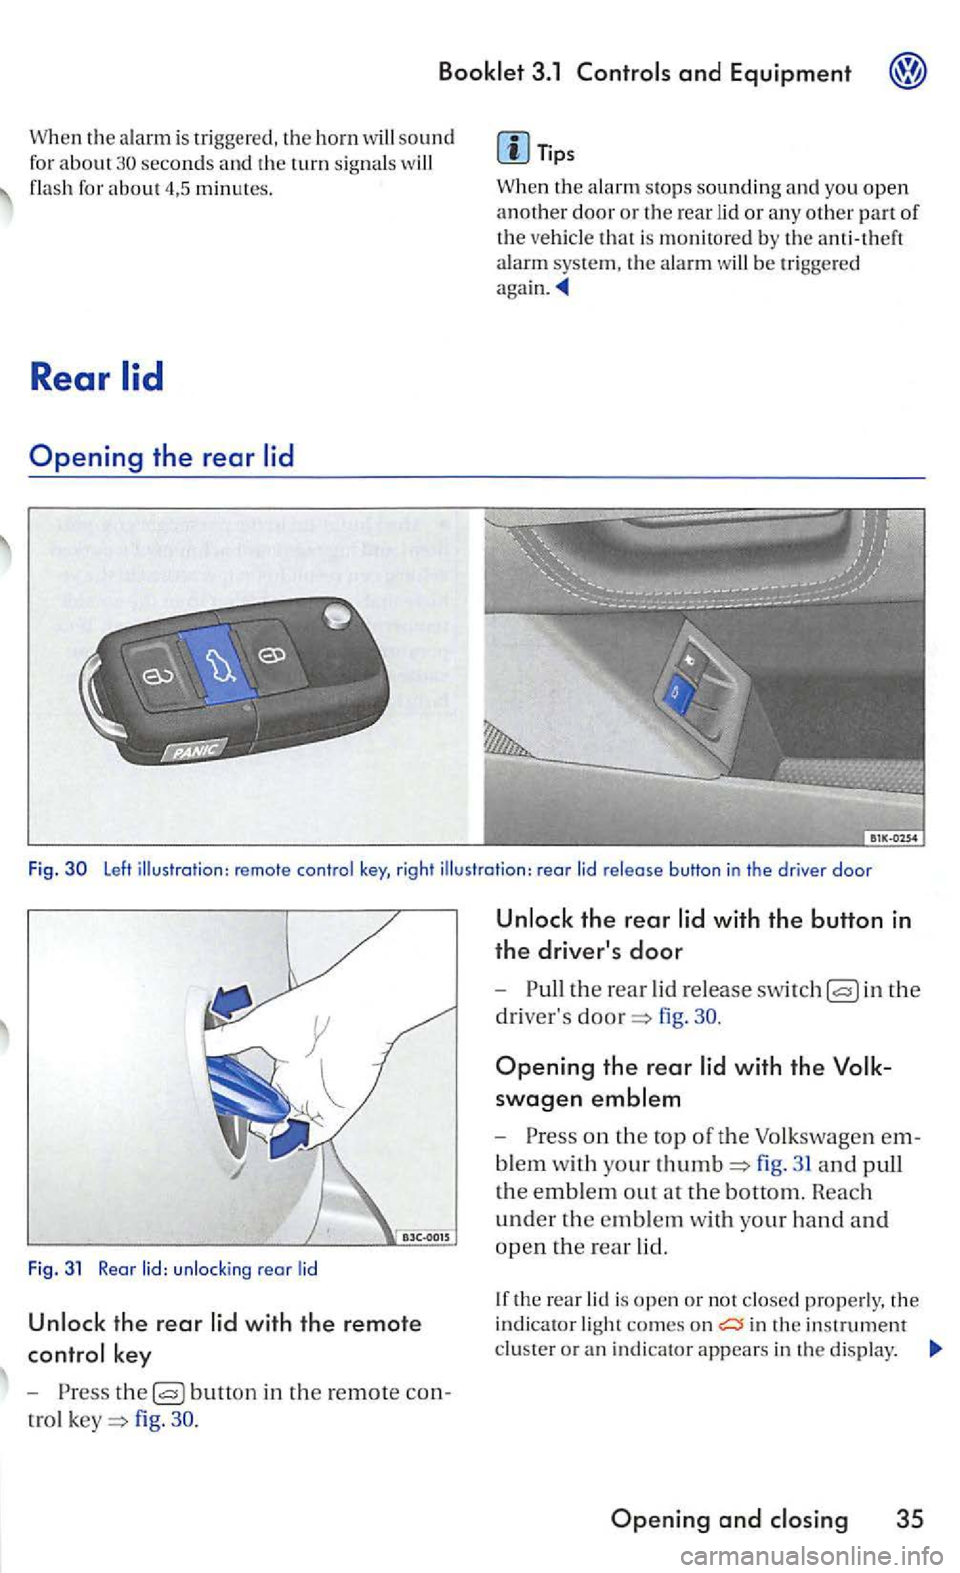 VOLKSWAGEN GOLF MK5 2006  Owners Manual When th e  alarm  is trig ge re d , the h orn w ill sound for about 30 seconds and th e  t urn  sig na ls  will fla sh  fo r about m in utes. 
Rear 
Opening the rear 
Tip s 
Wh en  t he  al a
rm stops